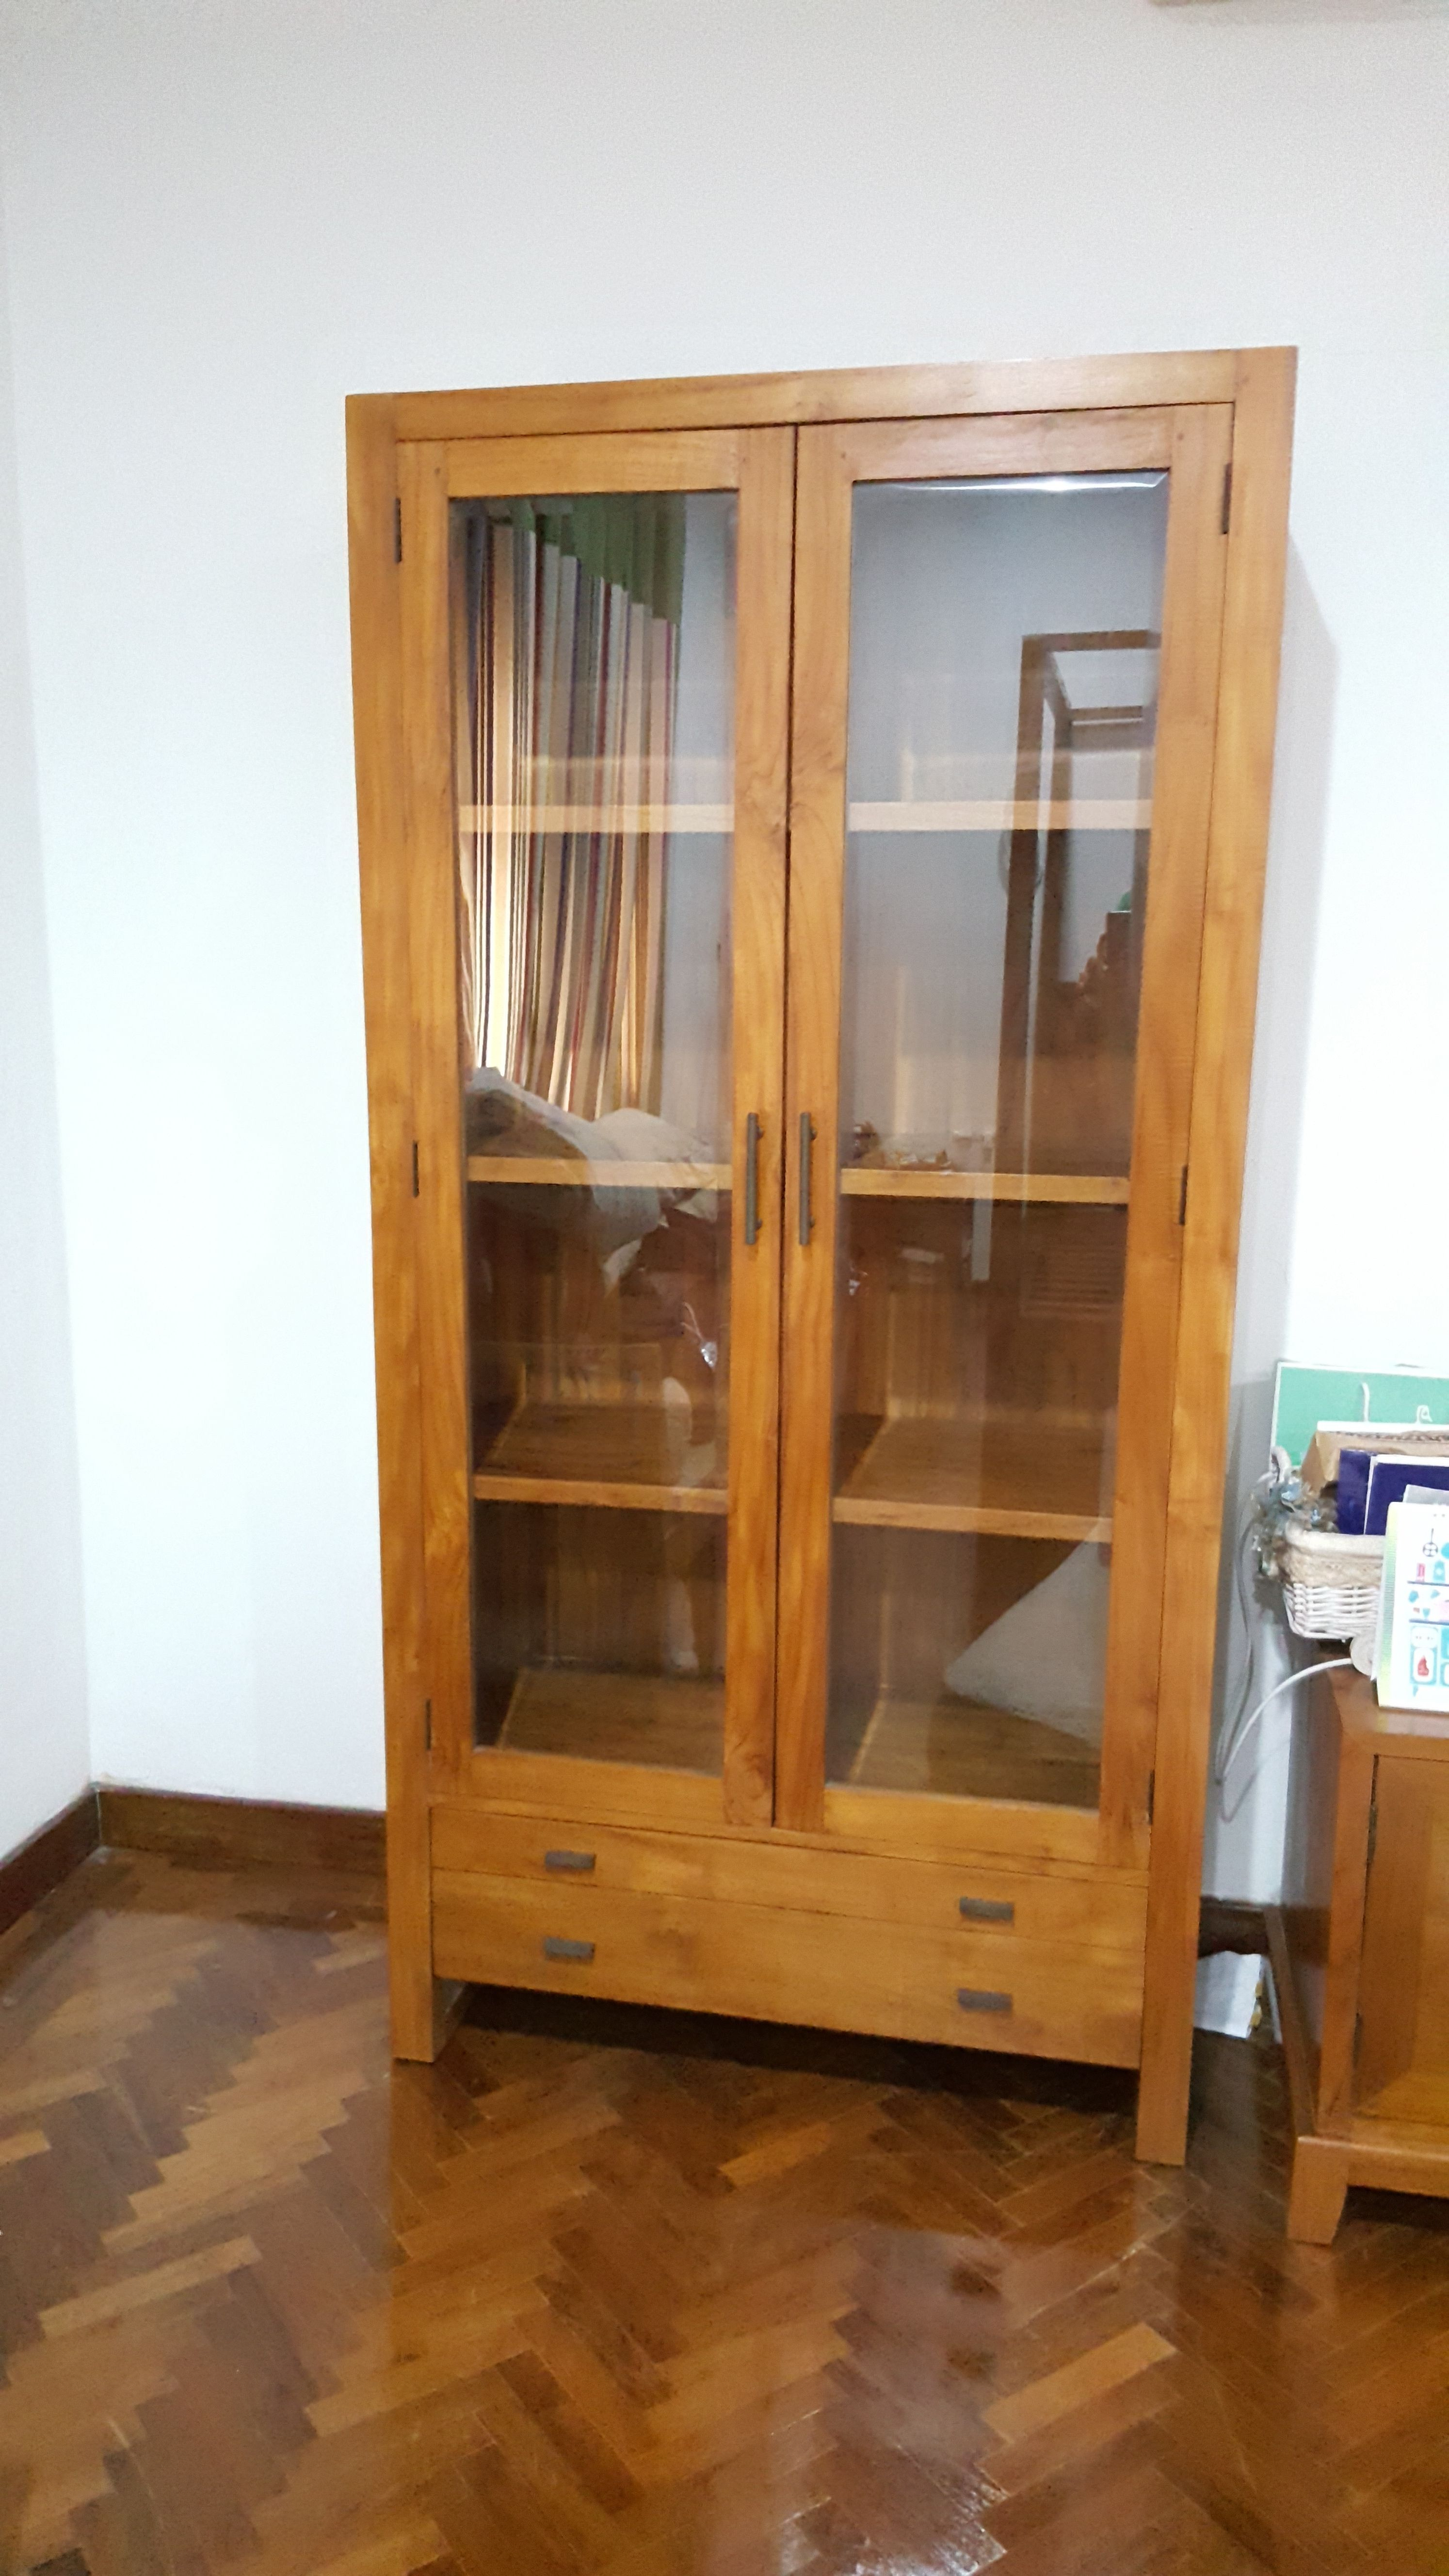 This Two Unit Teak Wood Display Cabinet With Glass Doors In The with regard to measurements 2988 X 5312